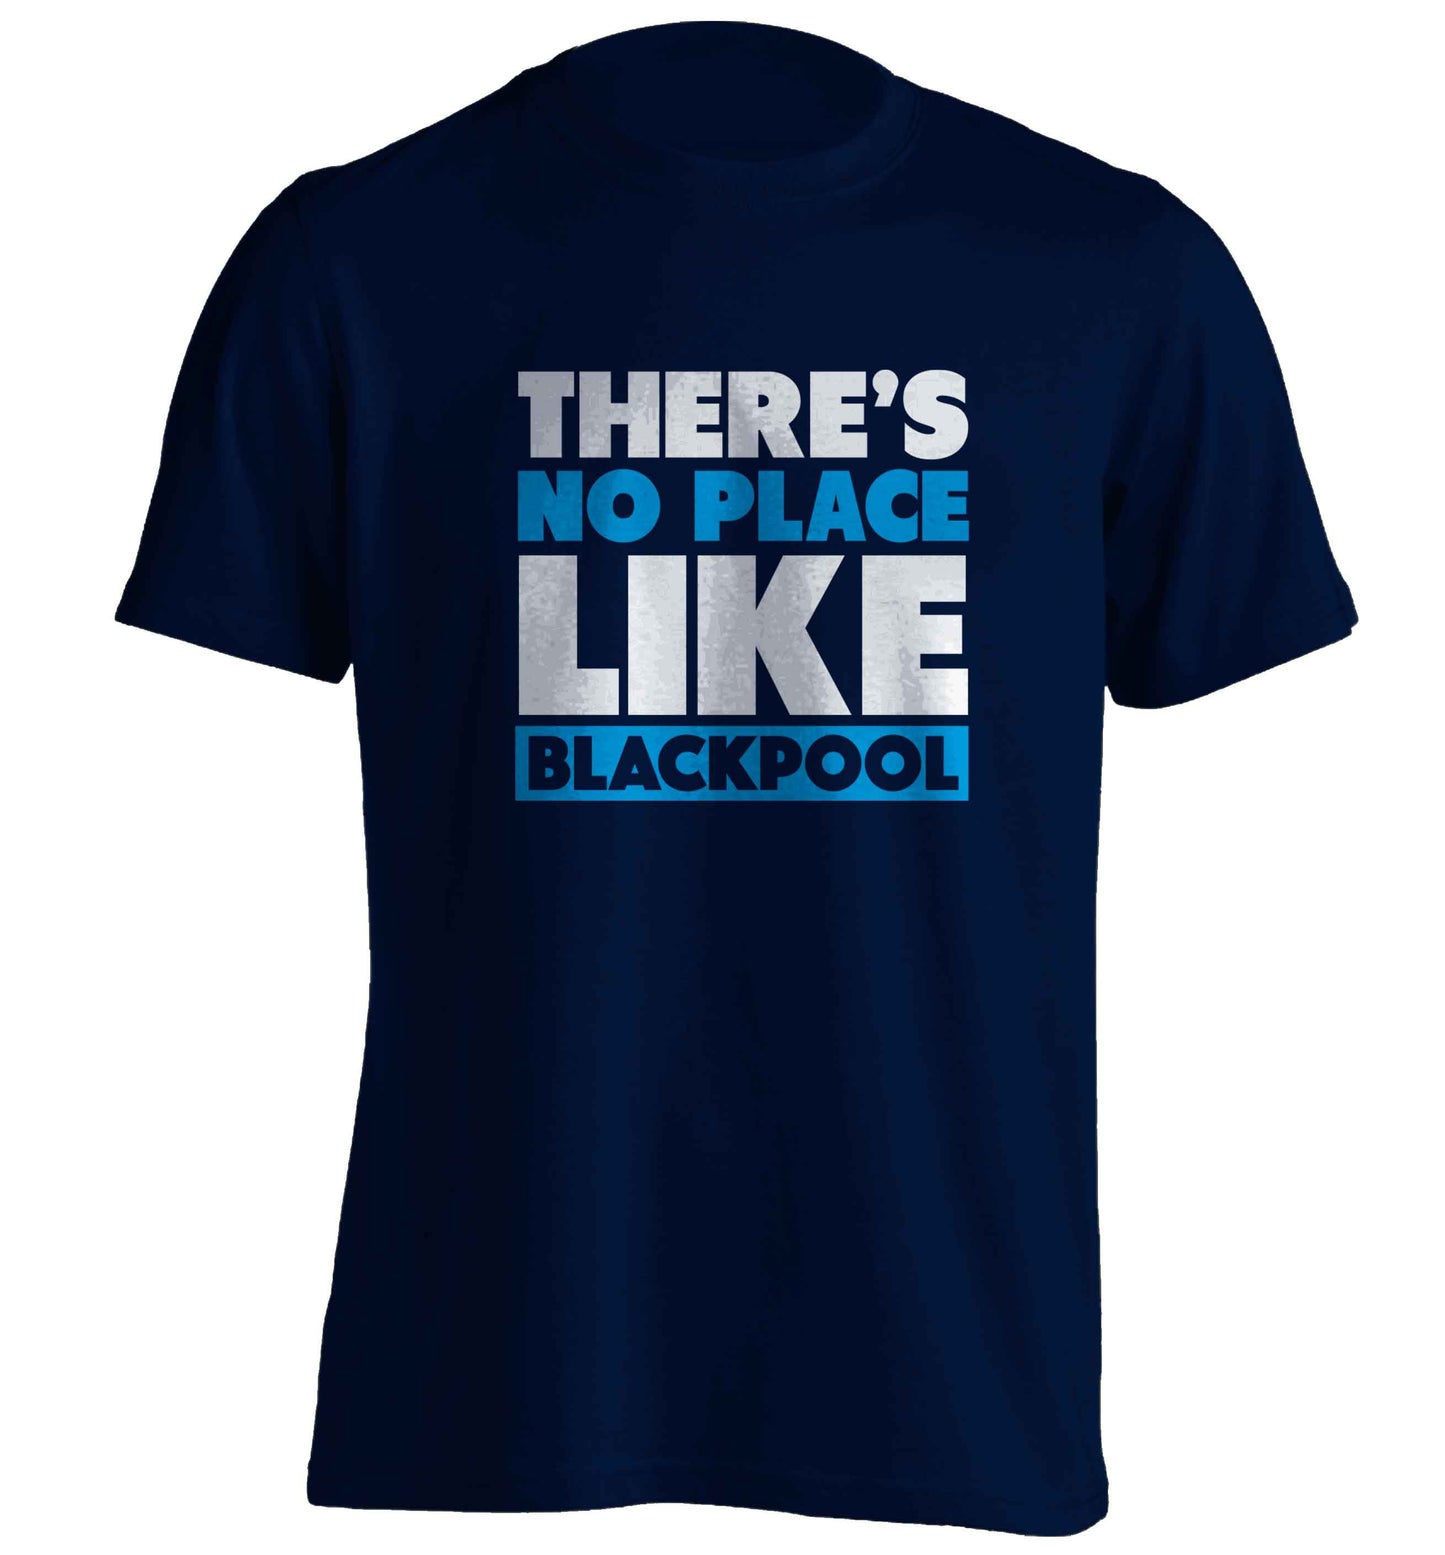 There's no place like Blackpool adults unisex navy Tshirt 2XL